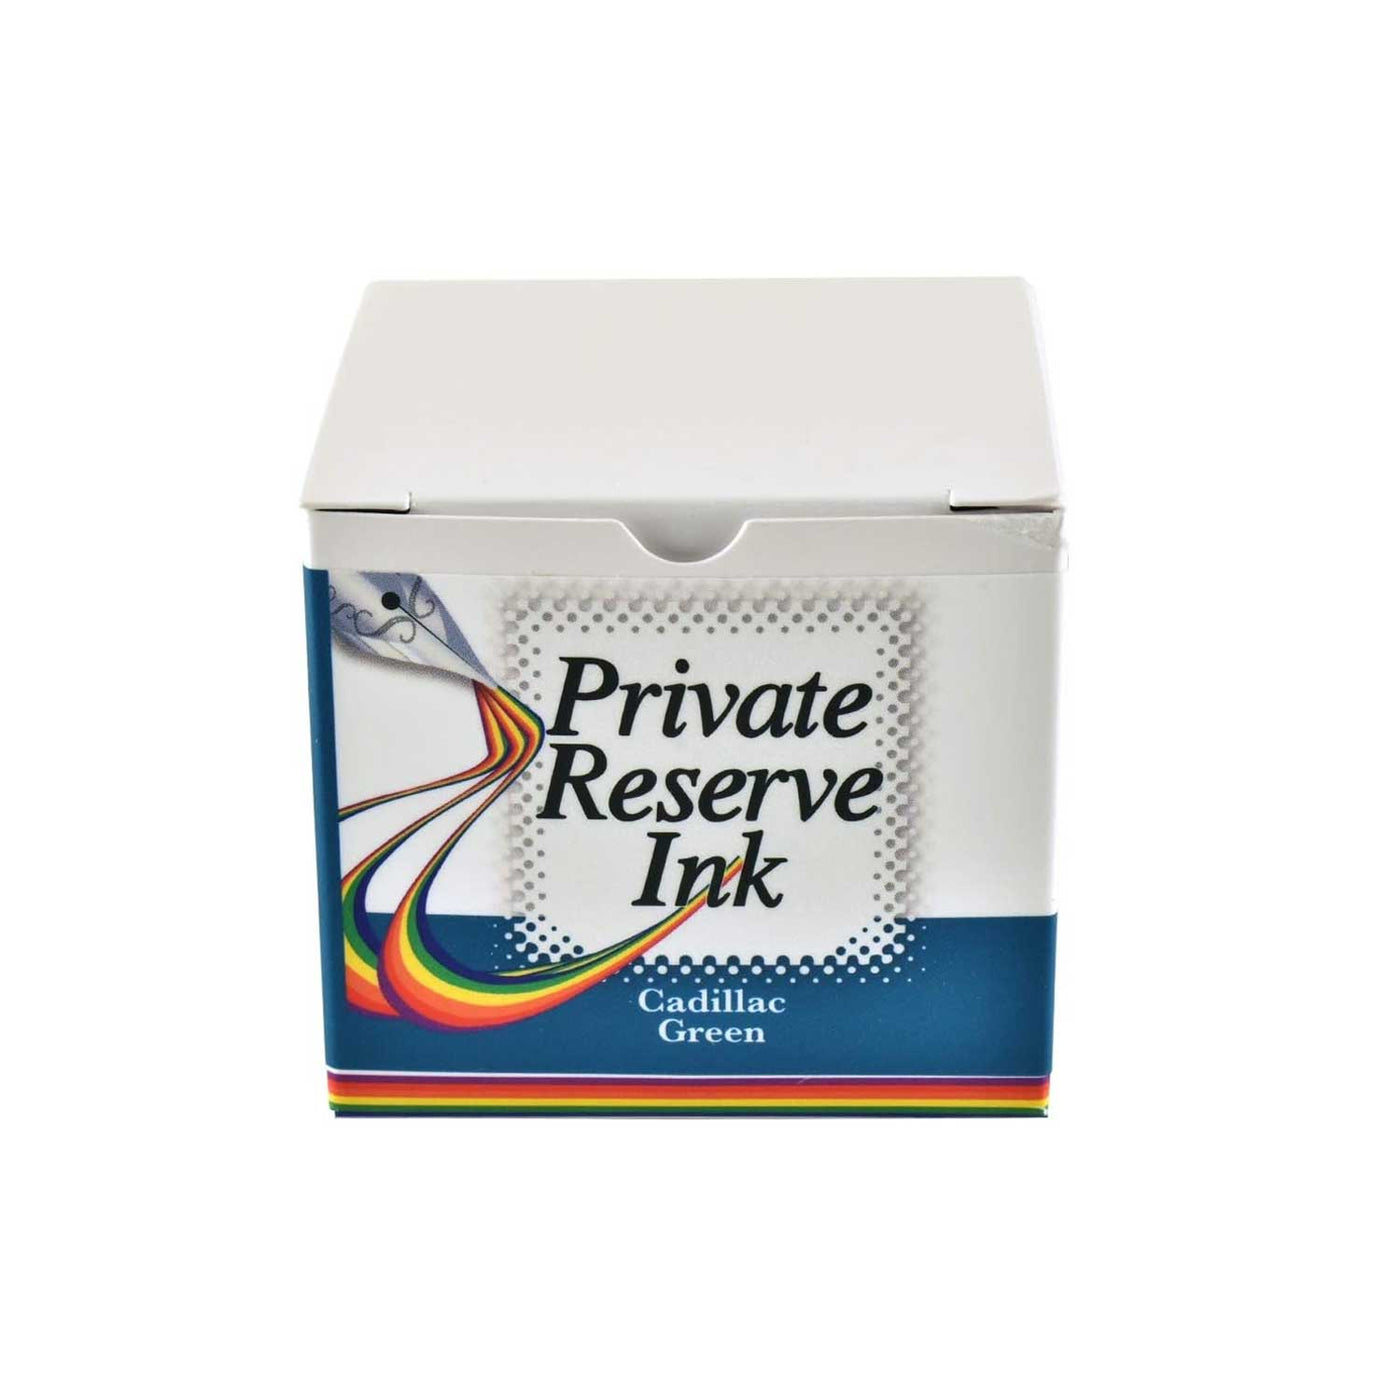 Private Reserve Cadillac Green Ink Bottle - 60ml 2